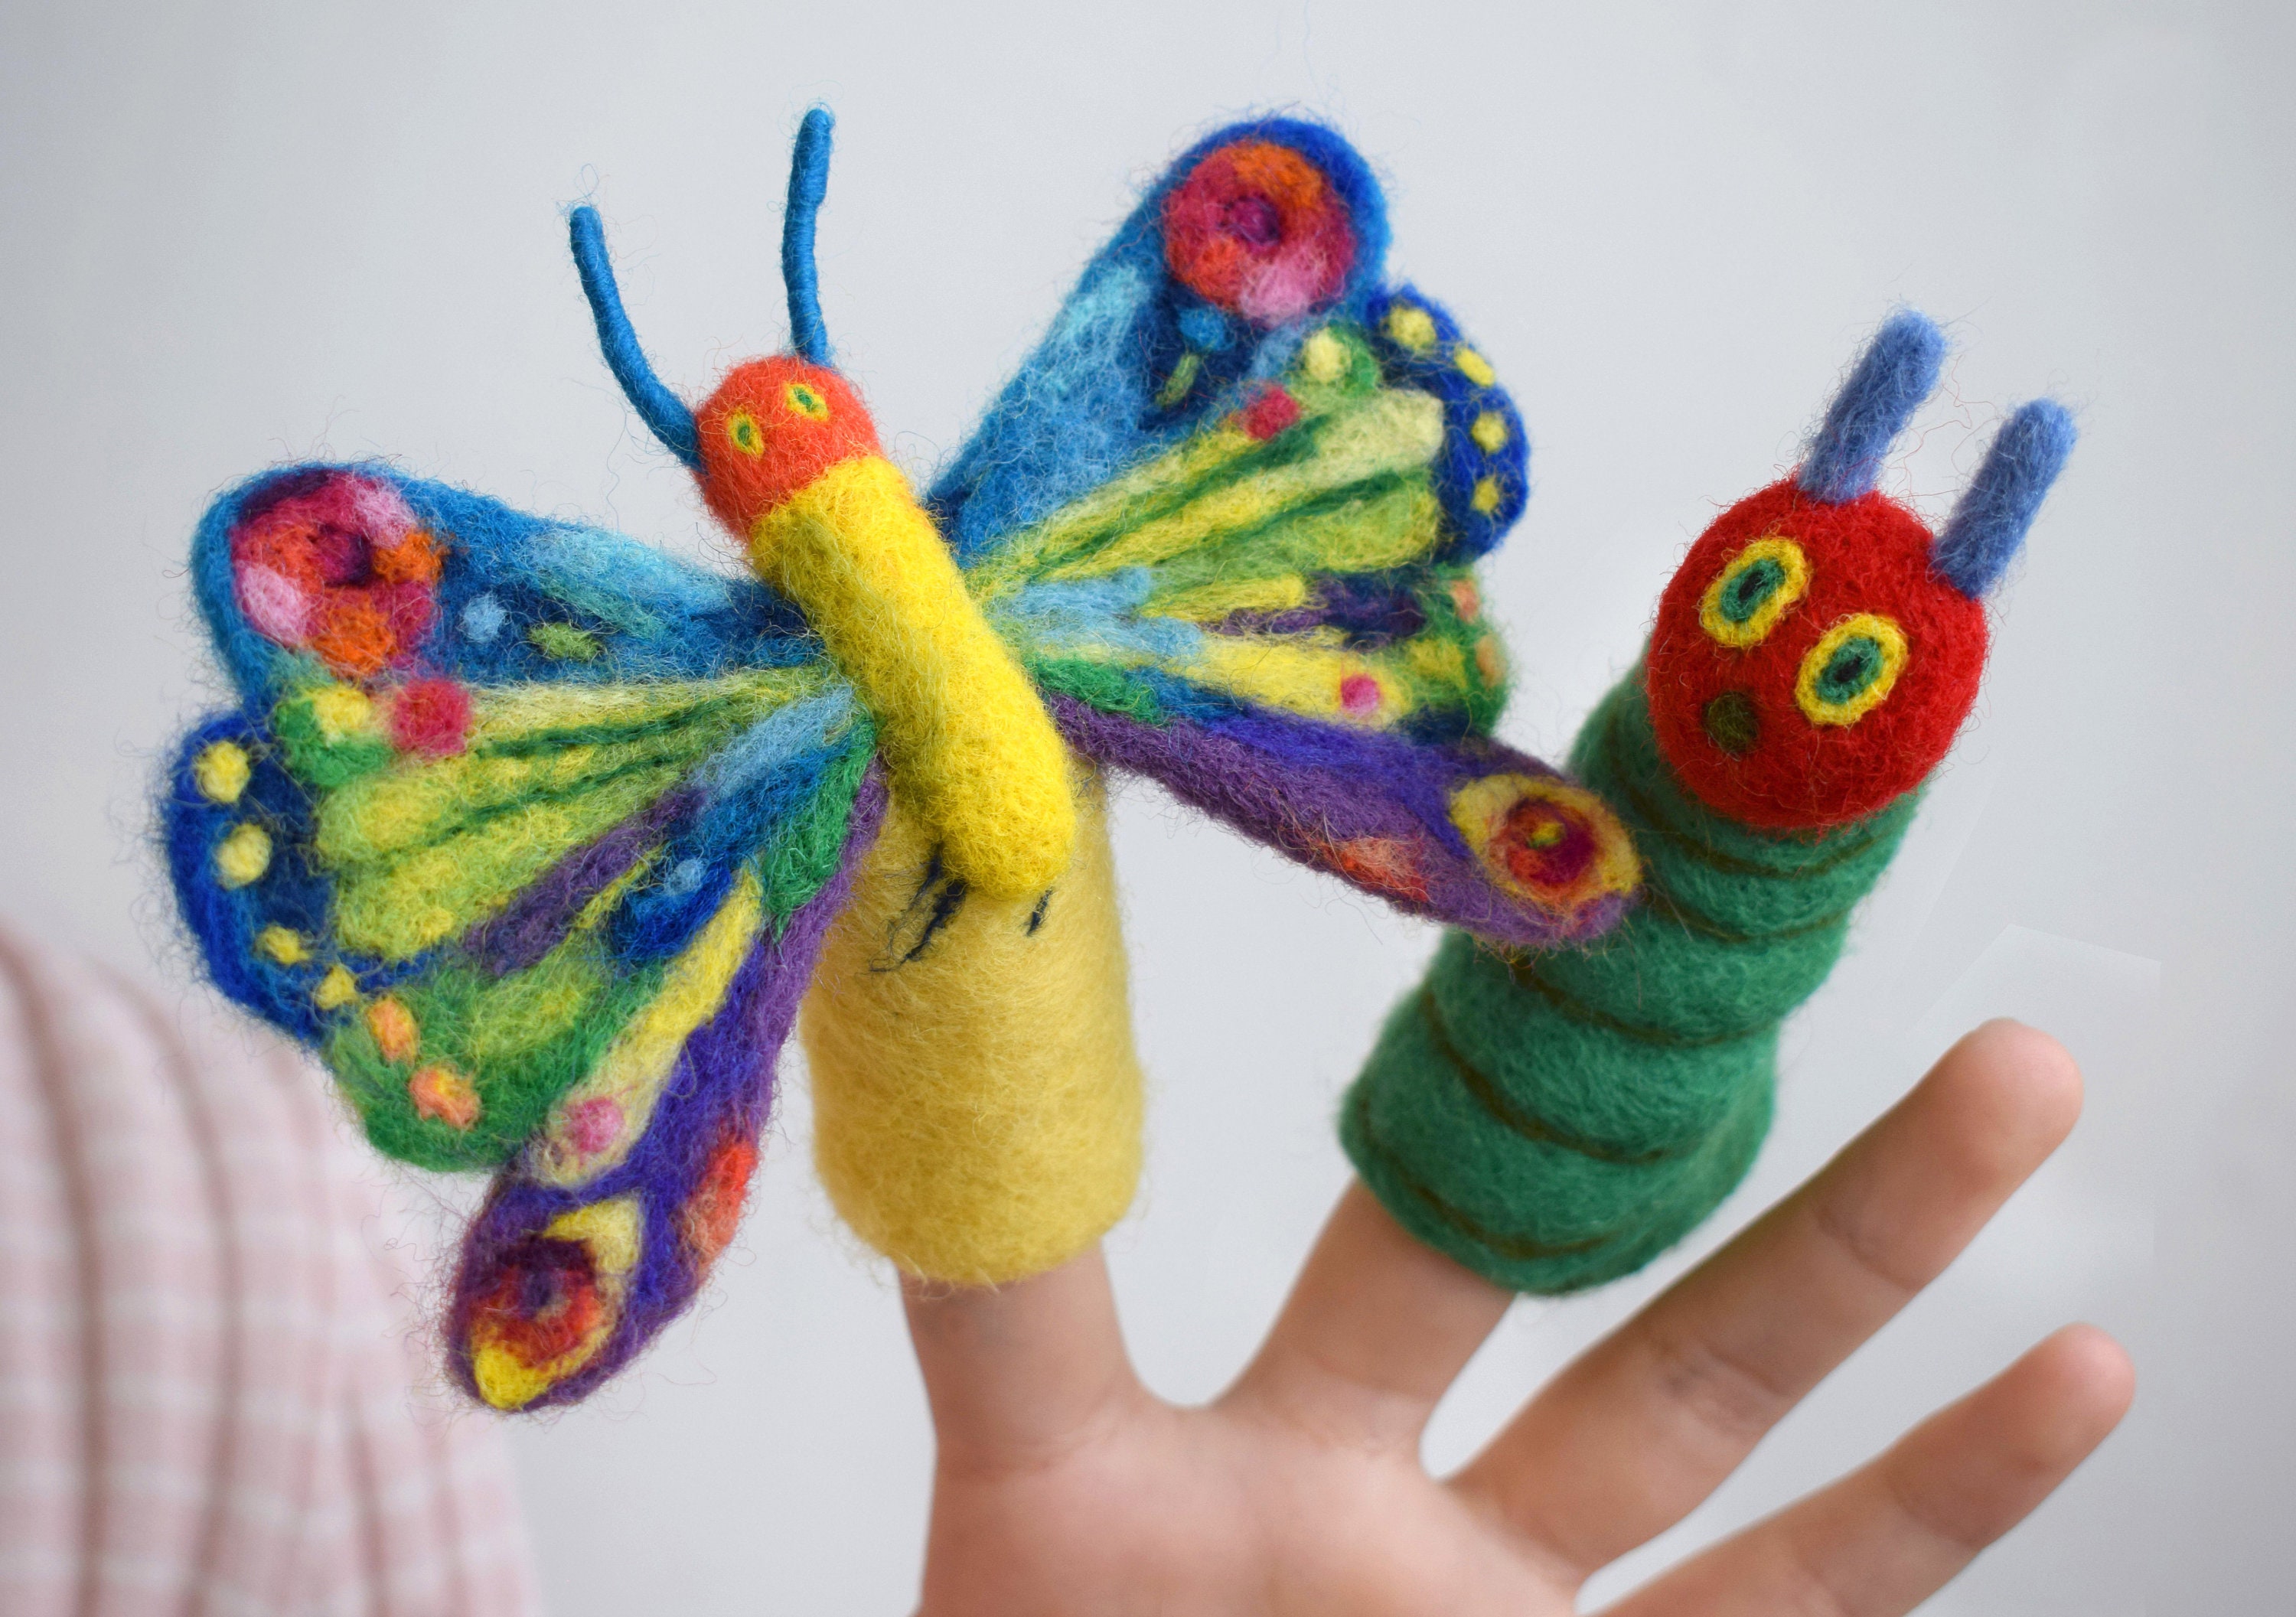 Creativity for Kids The Very Hungry Caterpillar Story Puppets: Sock Puppet  Kit for Toddlers from The World of Eric Carle, Crafts for Kids Ages 3-5+ -  Yahoo Shopping